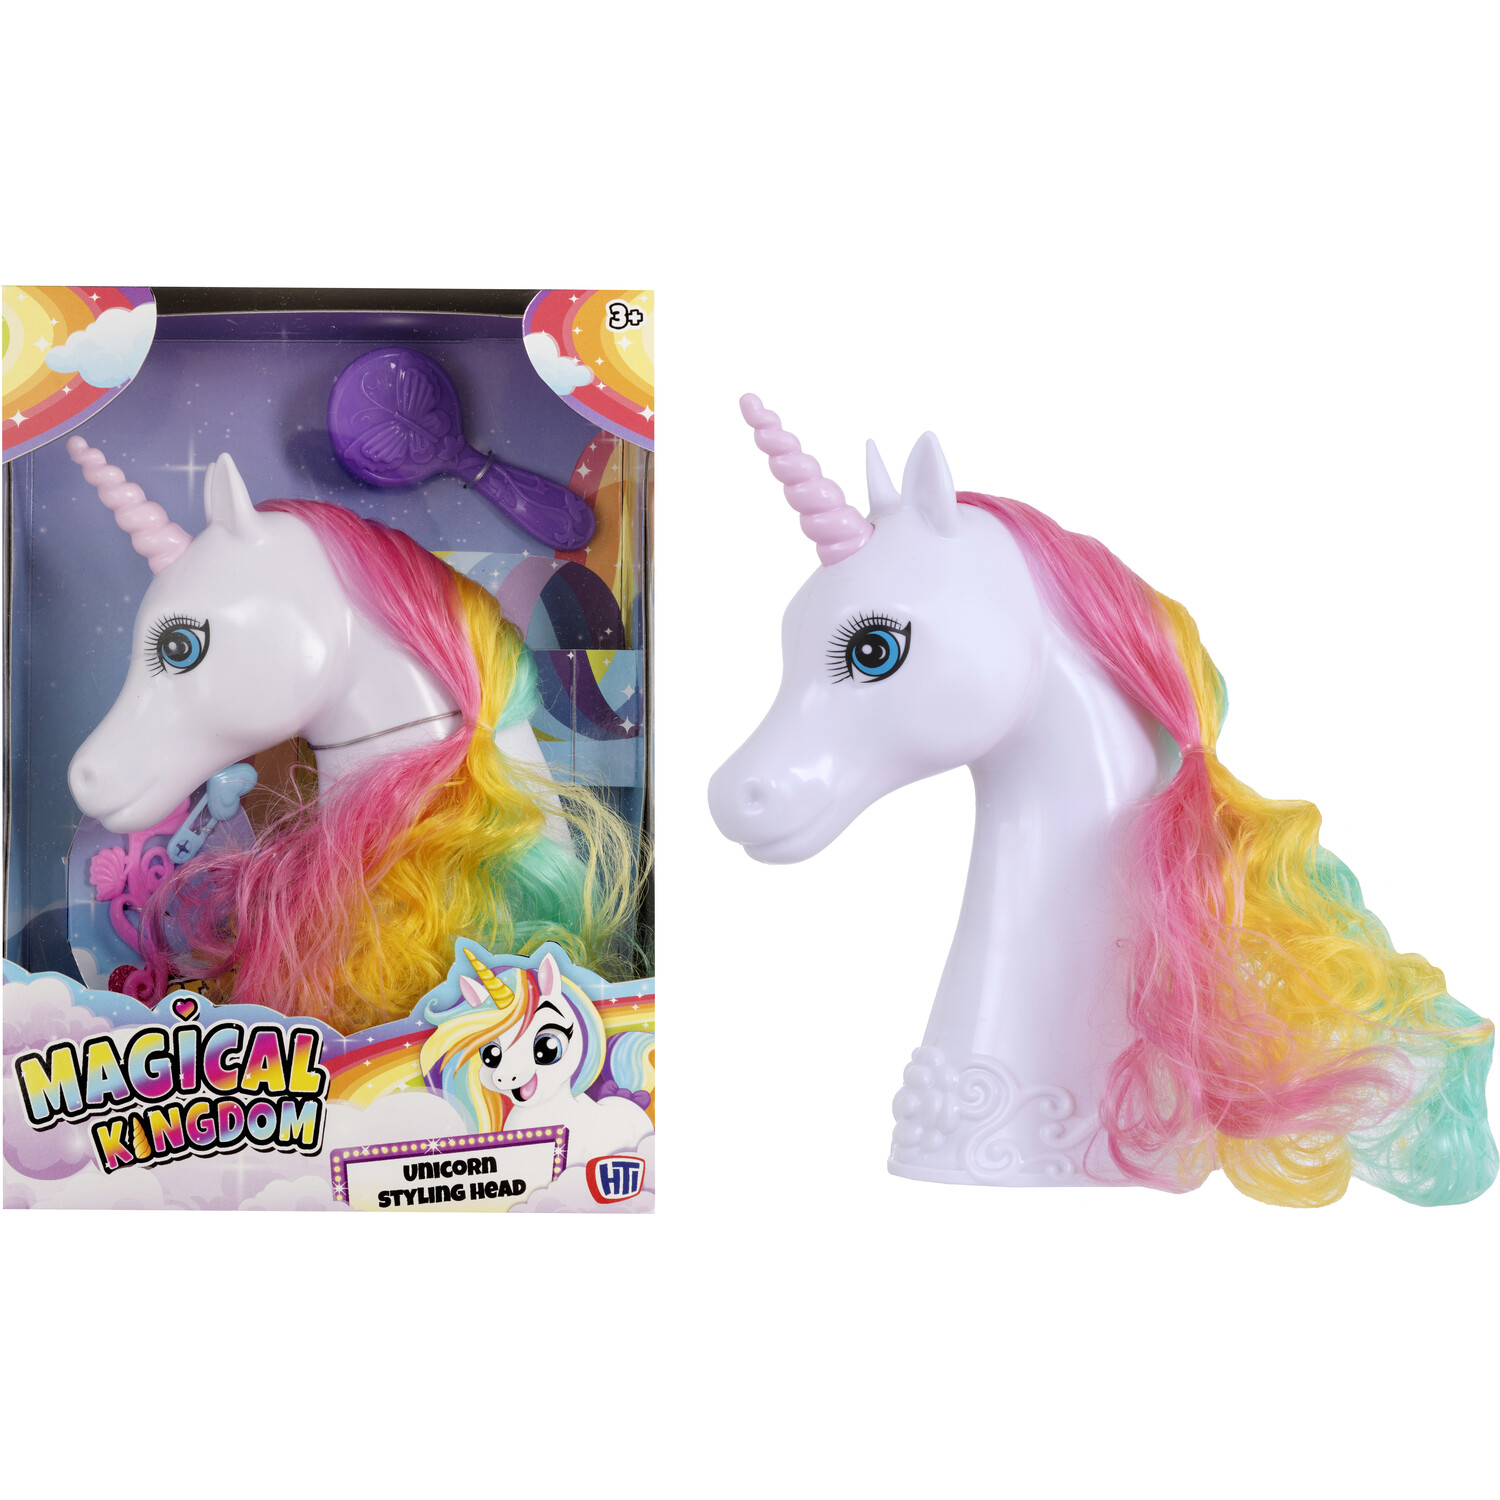 HTI Magical Kingdom Unicorn Styling Head Doll and Accessories Image